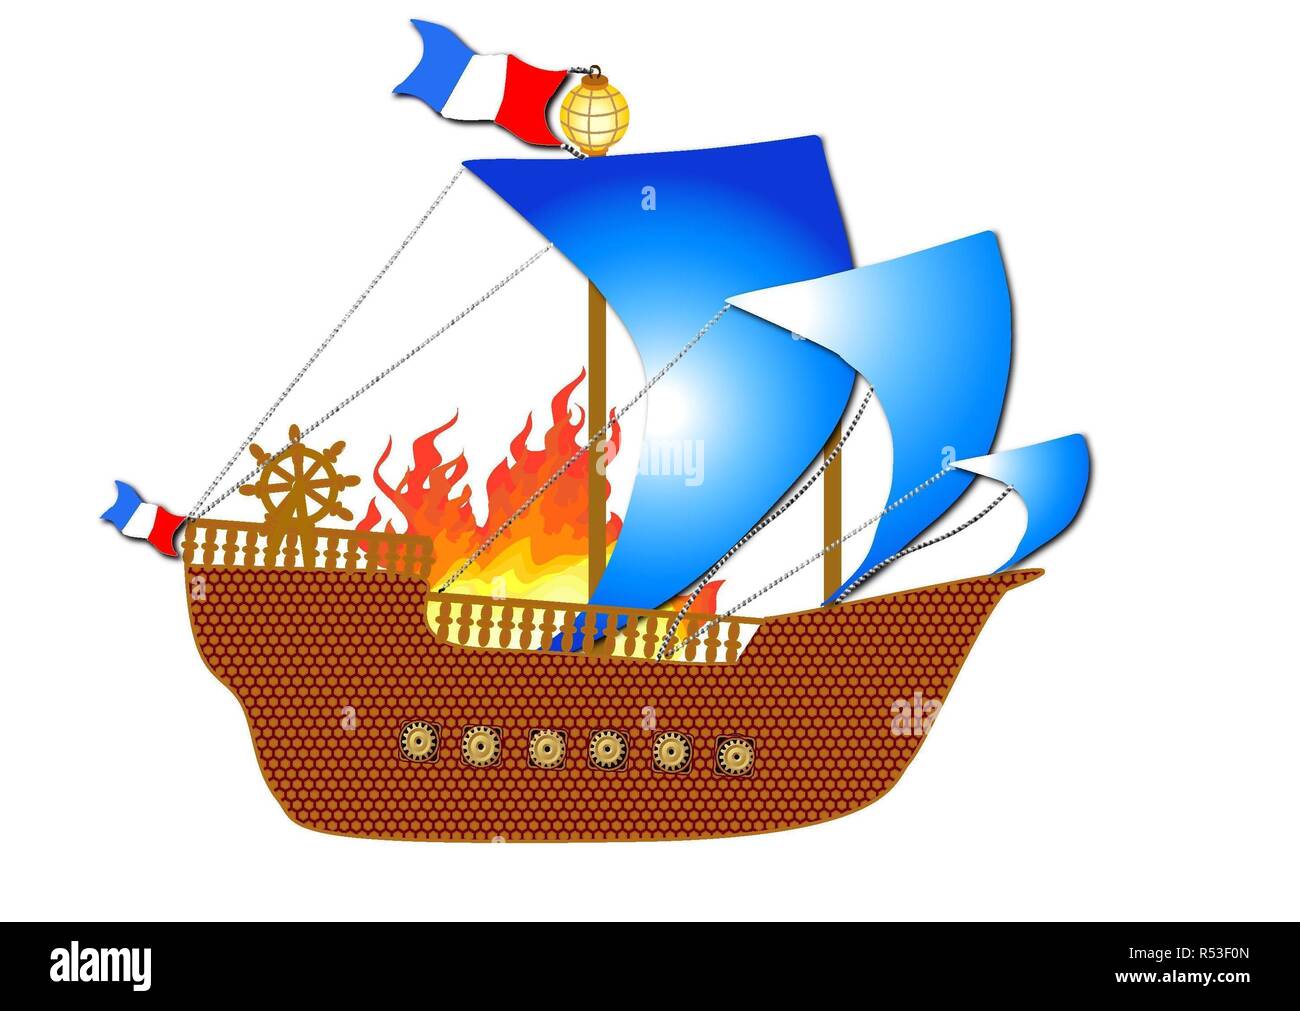 French medieval ship in fire Stock Photo